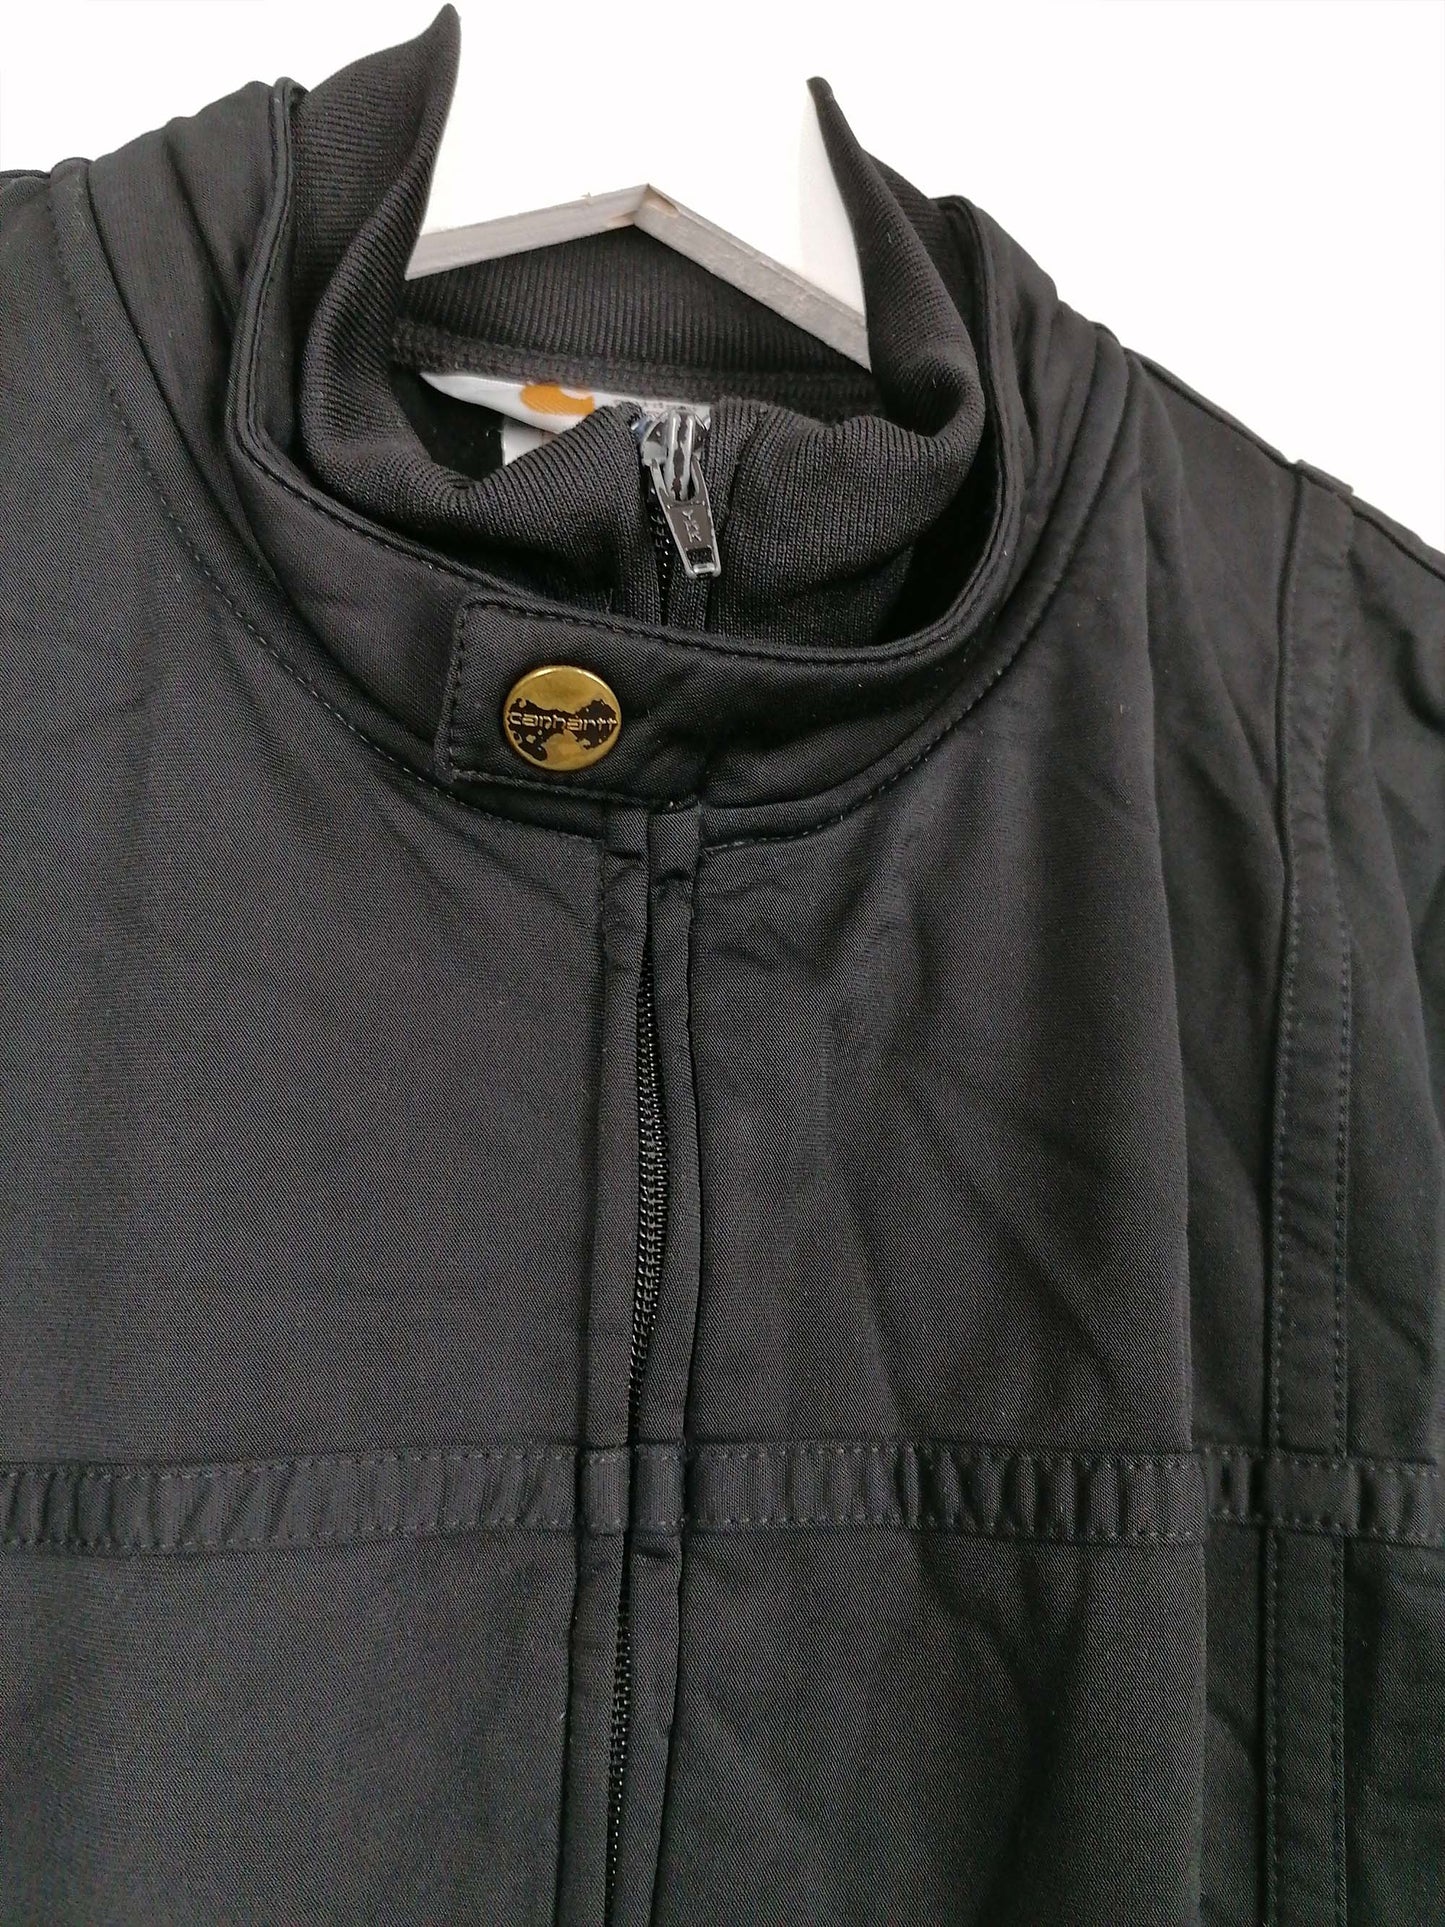 CARHARTT Rugged Outdoor Wear Track Jacket Polyester Black - size M-L